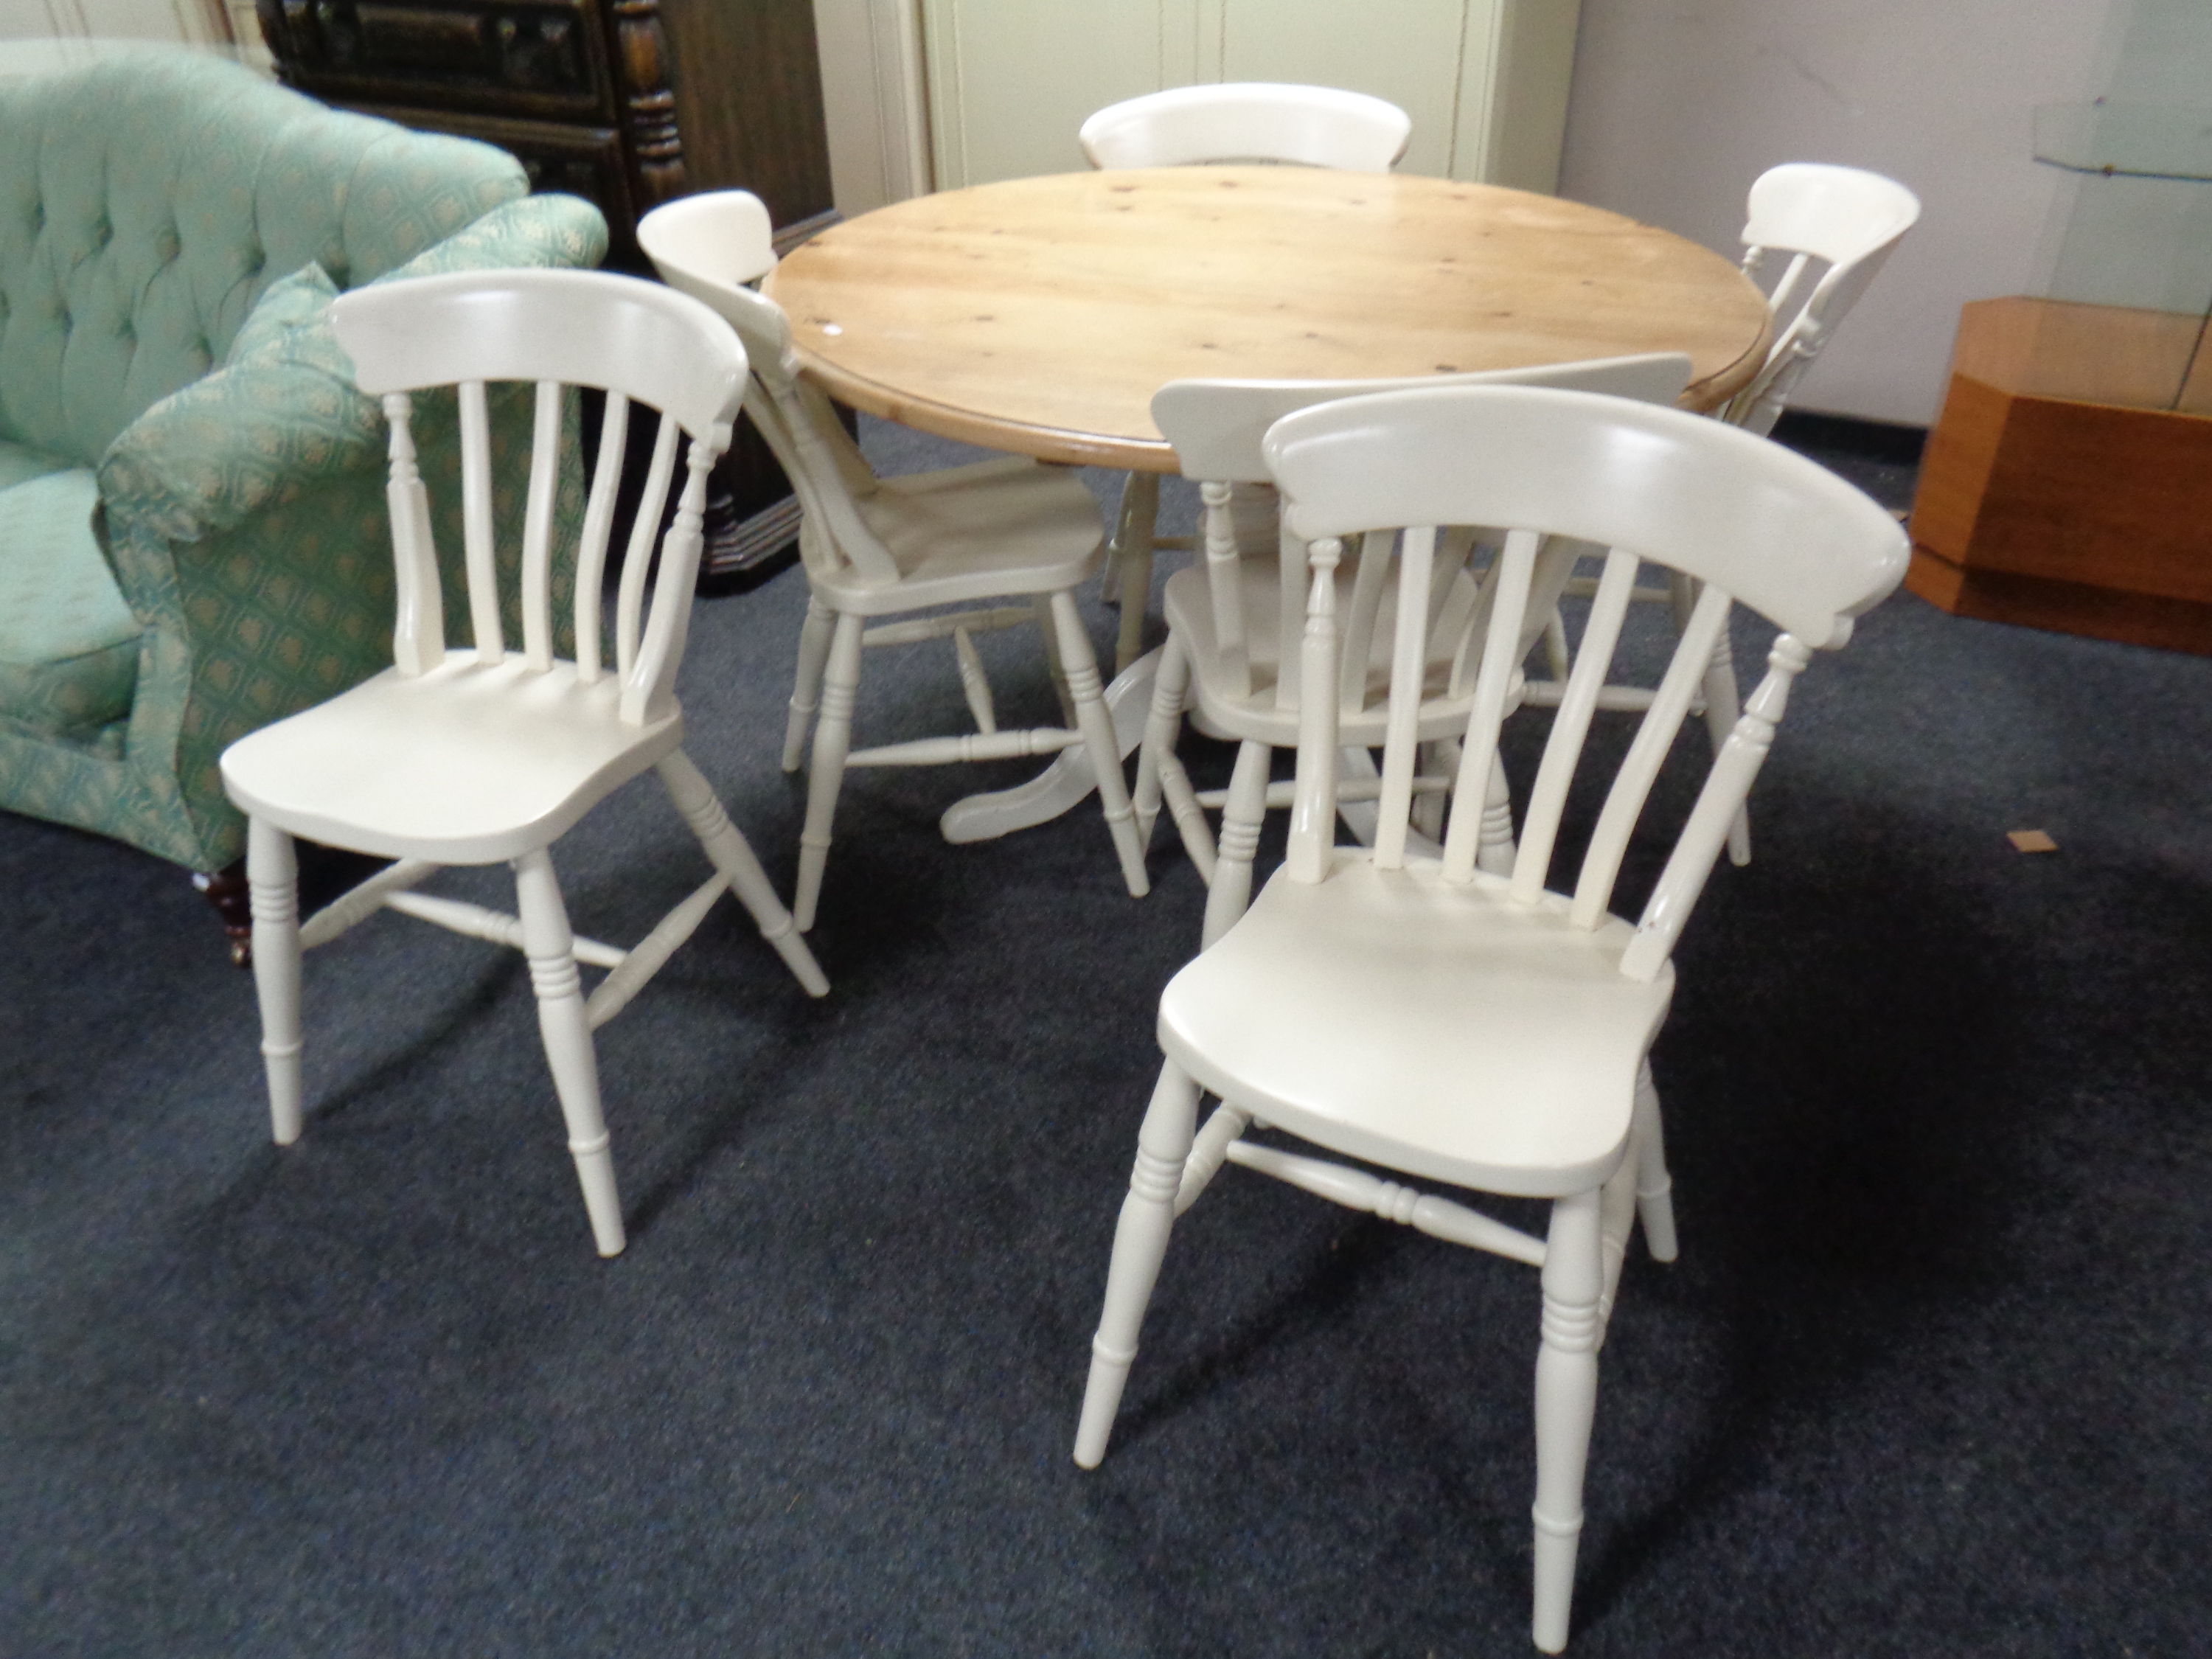 A circular pine dining table together with a set of six painted kitchen chairs